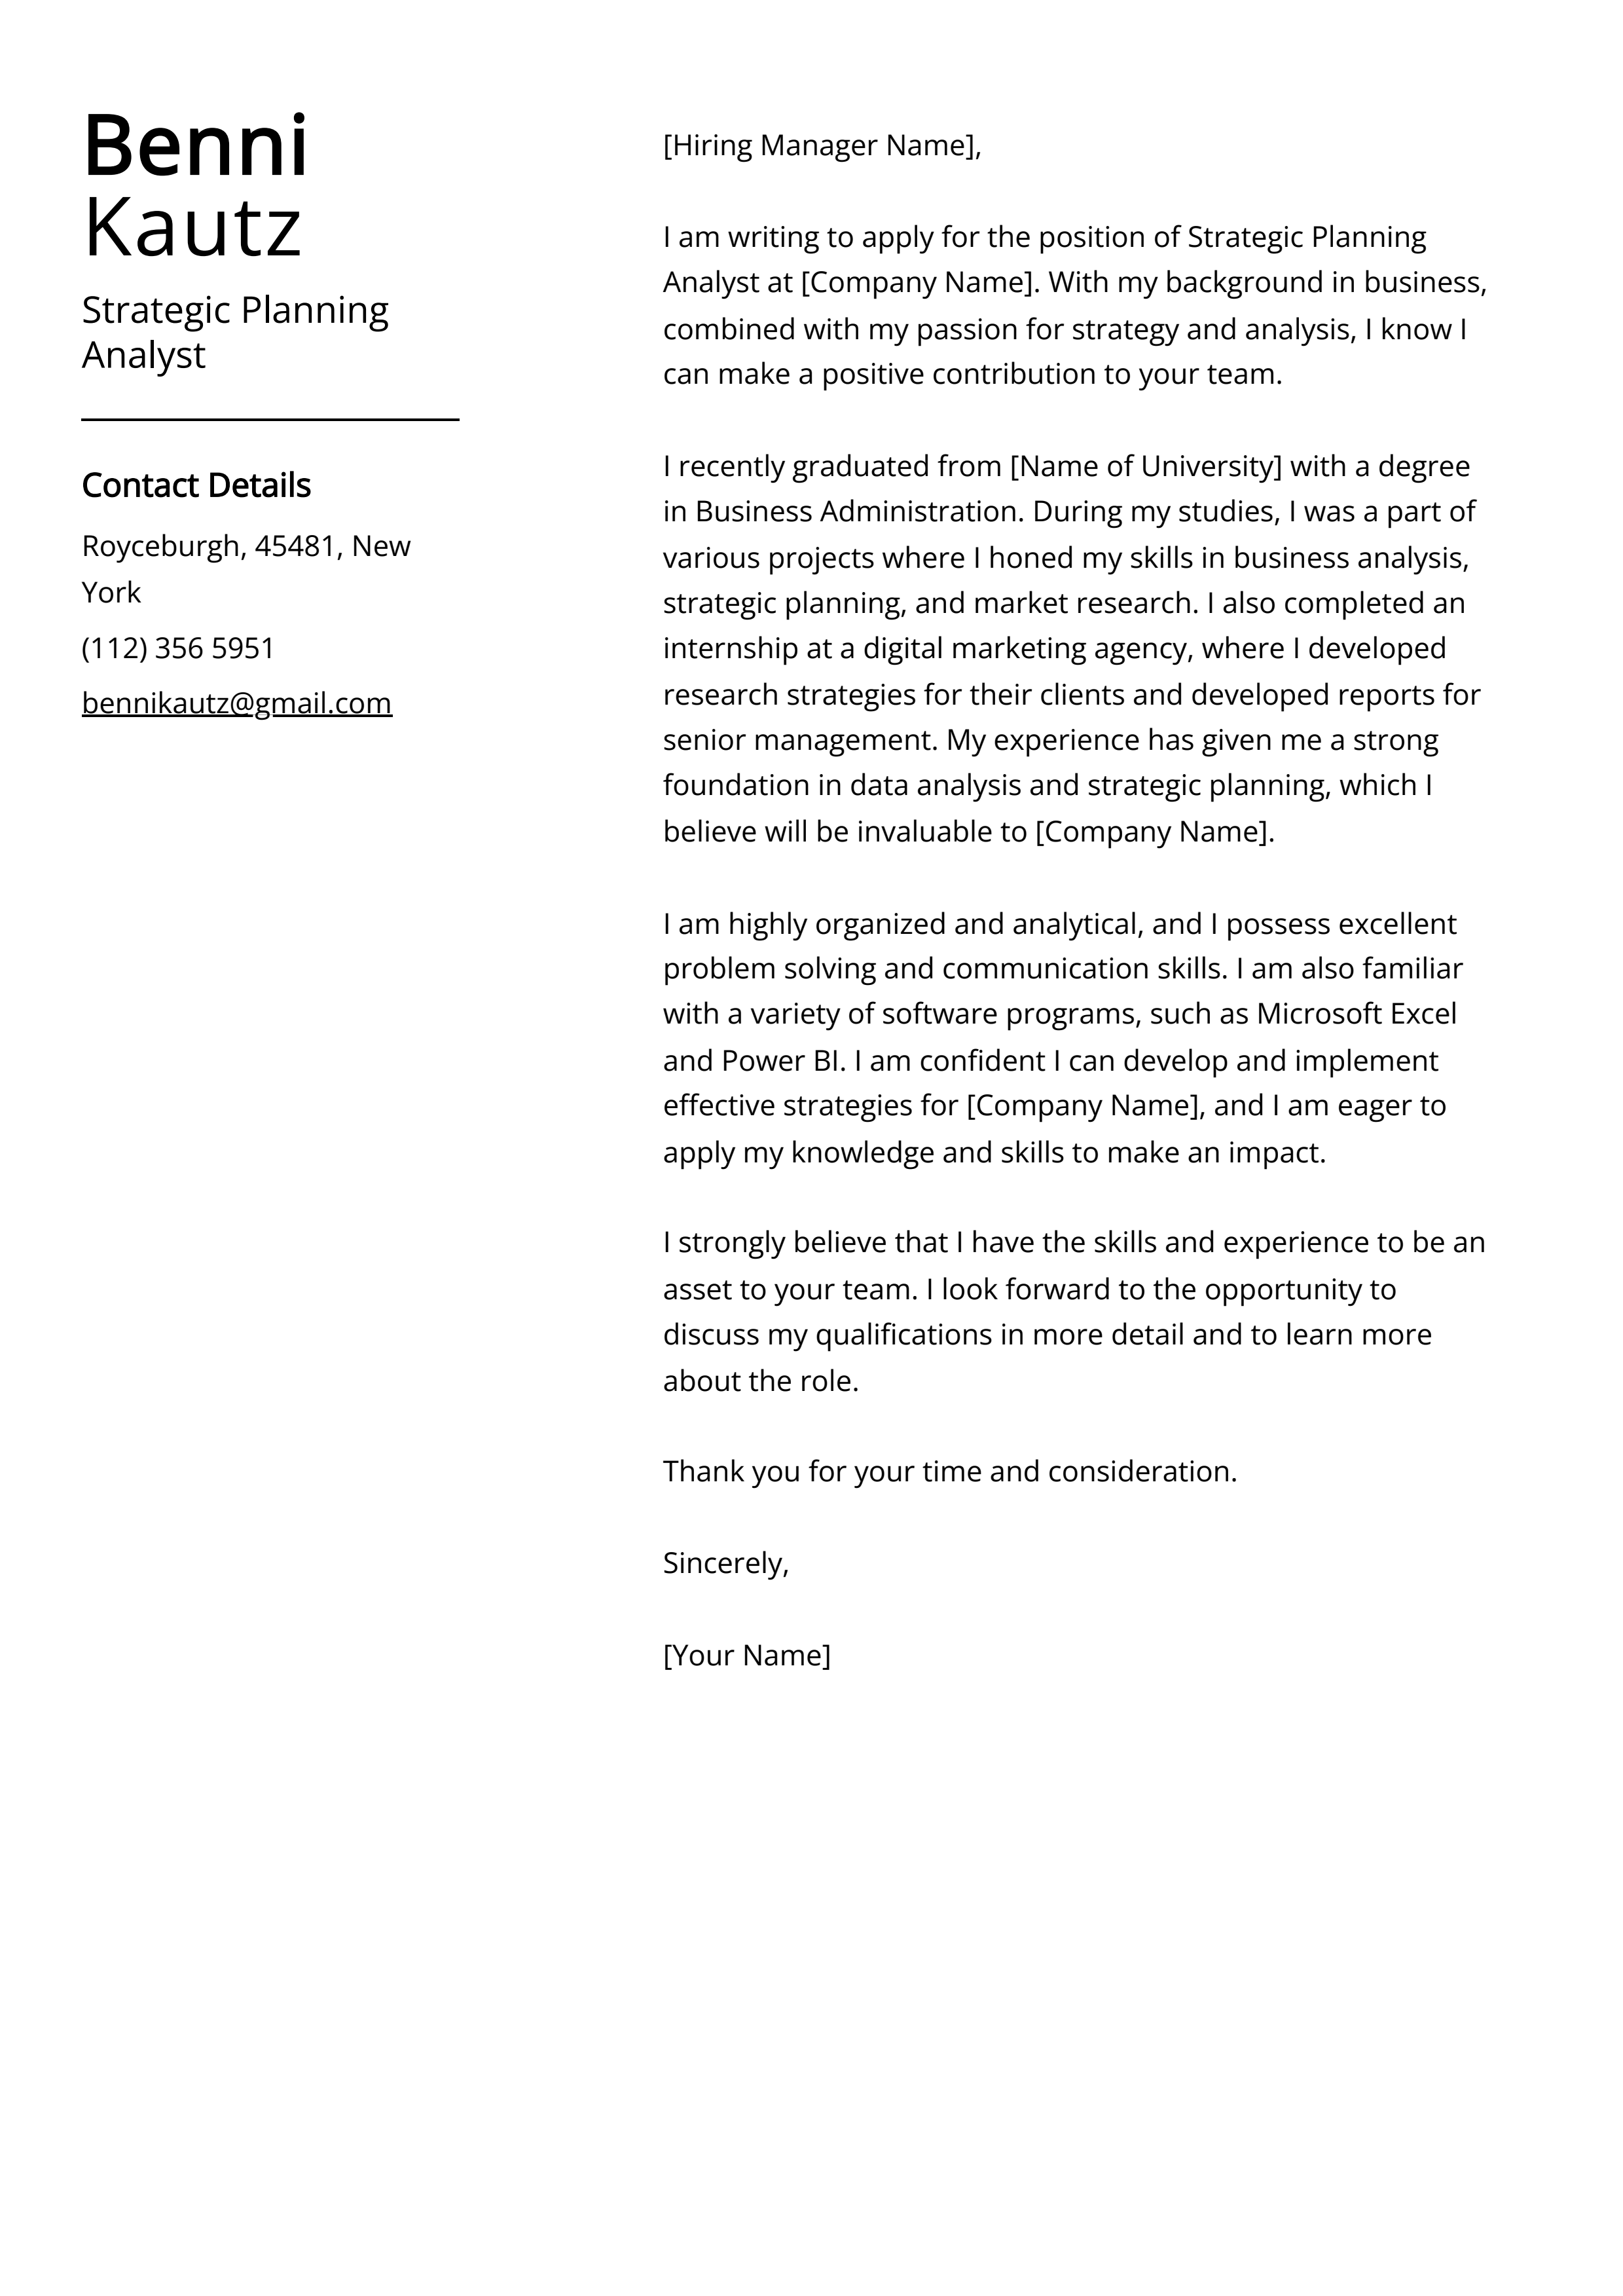 Strategic Planning Analyst Cover Letter Example